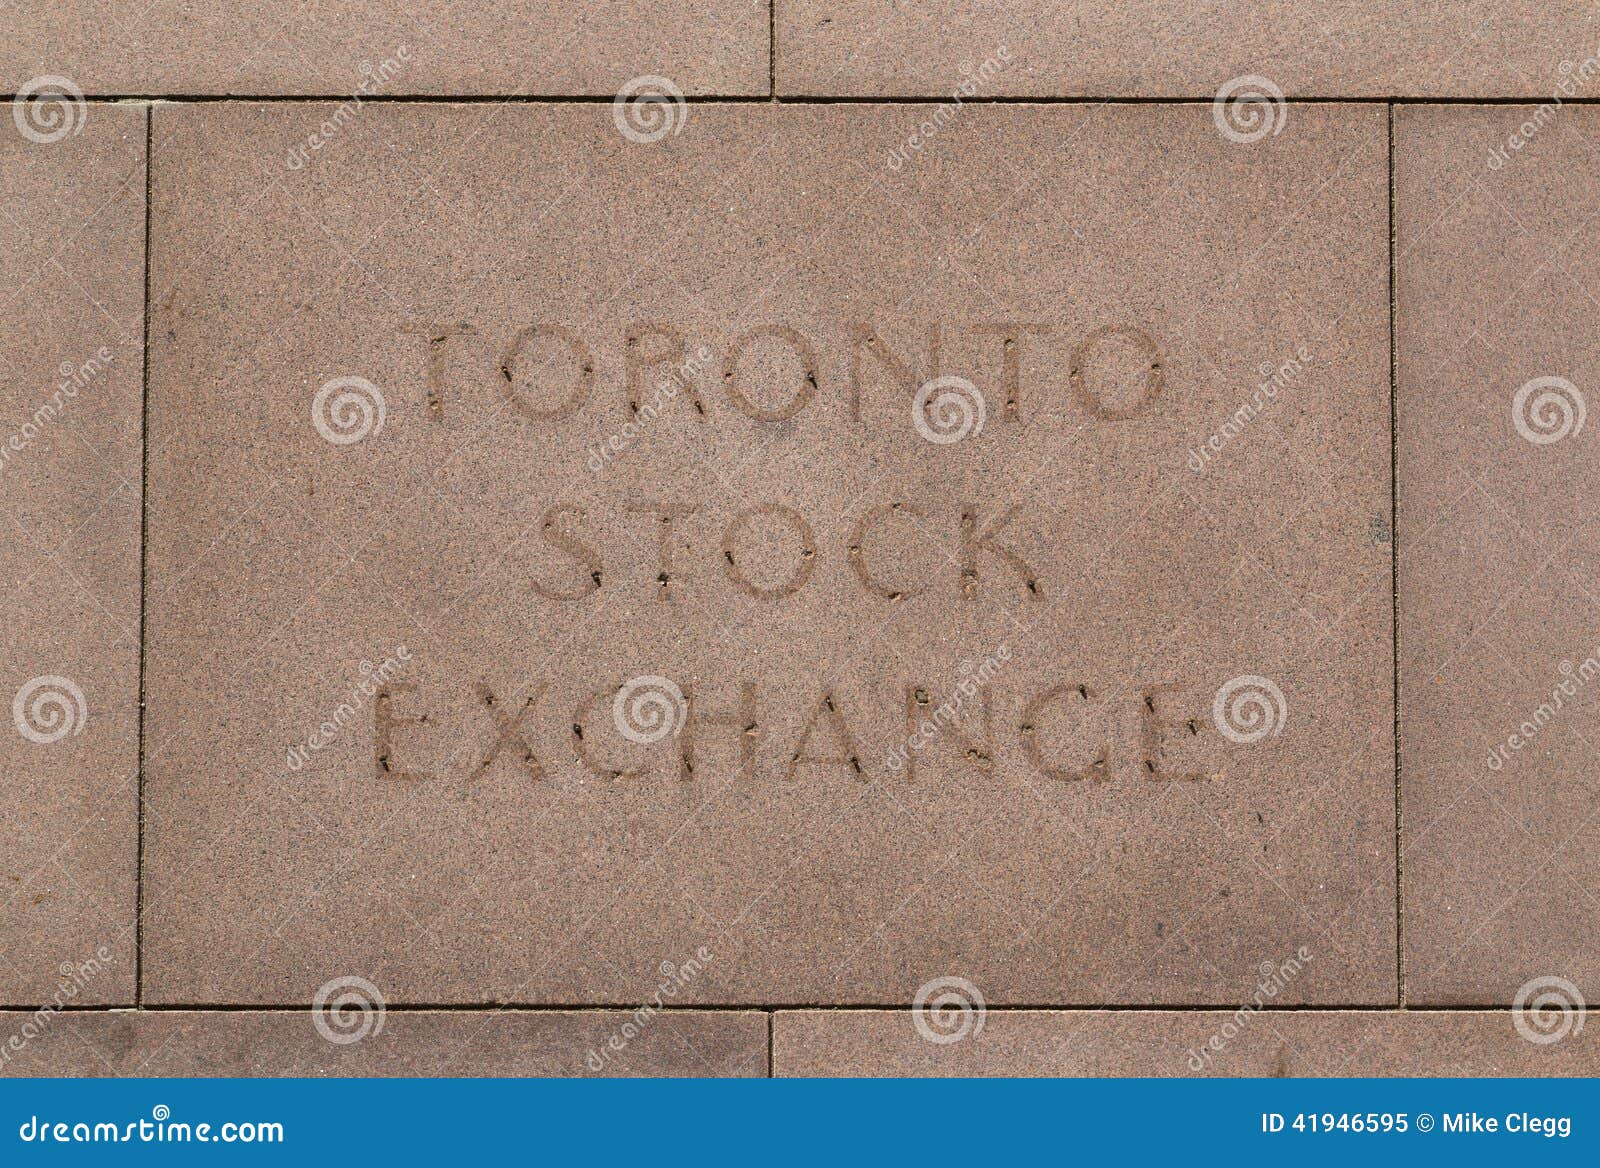 Toronto Stock Exchange Sign Editorial Image Image of faded, building